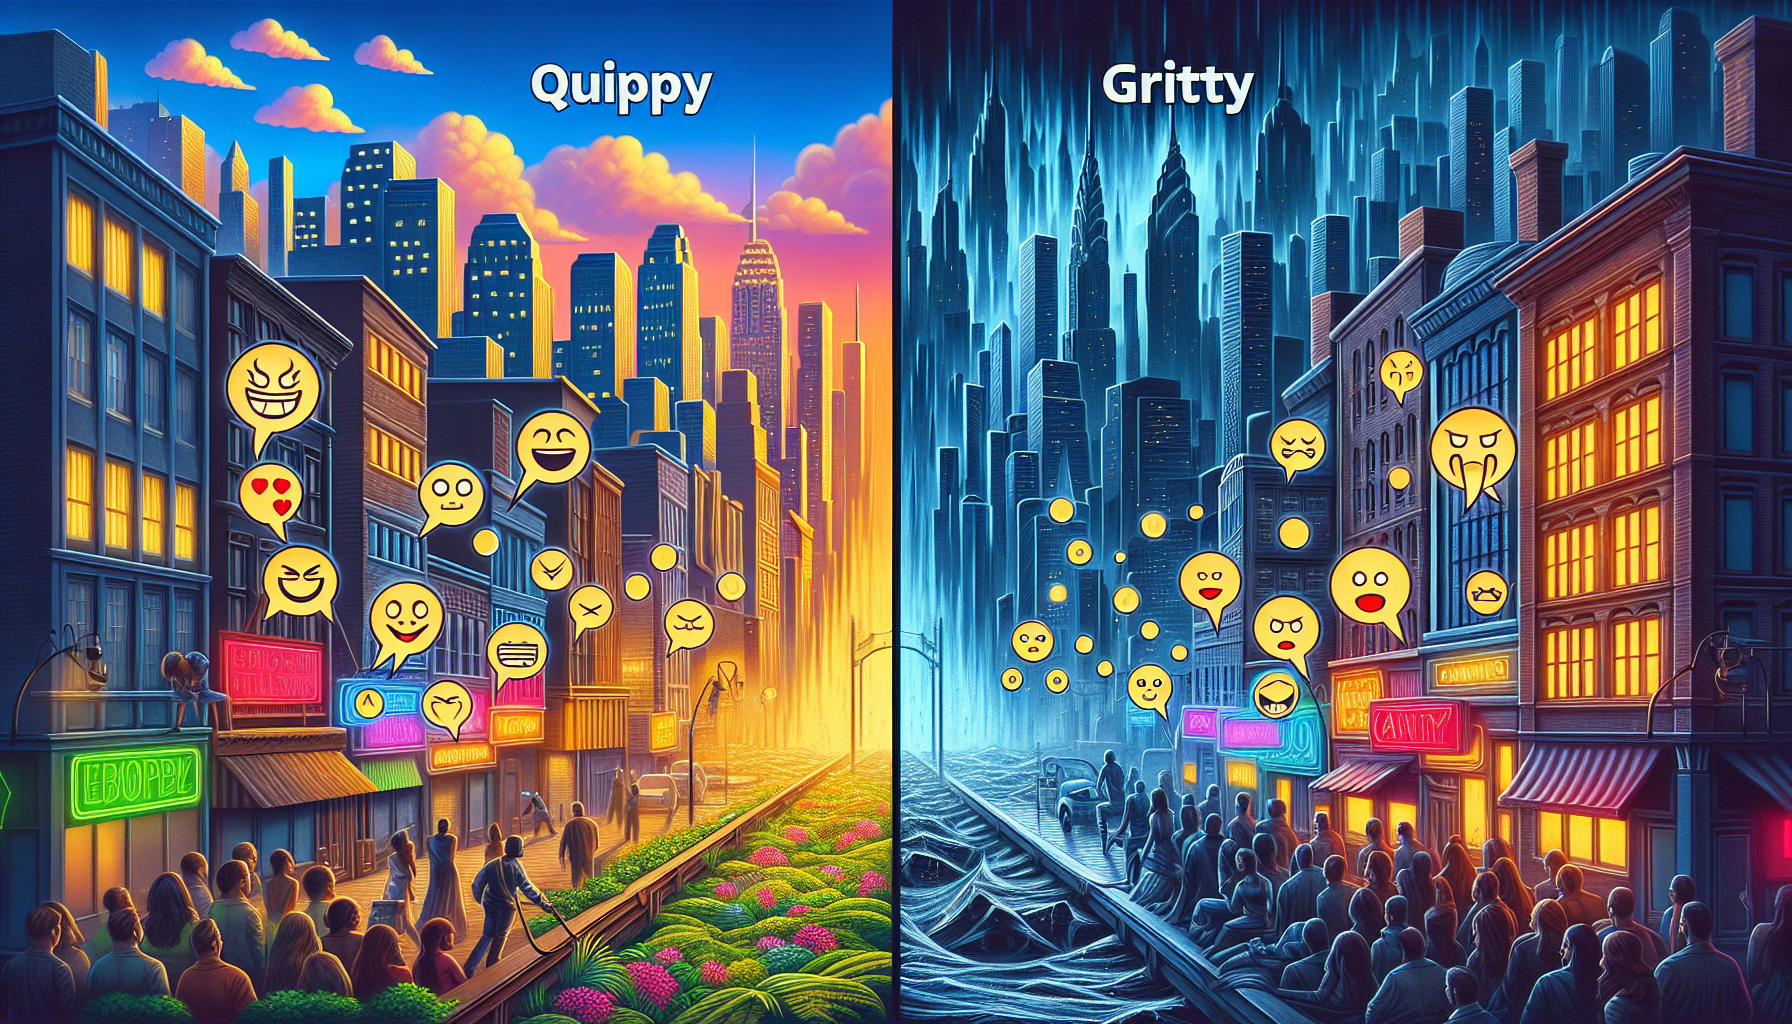 Visualize the contrast between quippy and gritty dialogue in action films. On one side, represent quippy dialogue as a scene filled with vibrant, modern cityscapes with speech bubbles containing humorous, light-hearted symbol-representations. On the other side, represent gritty dialogue as a darker, more intense urban scene with speech bubbles containing heavy, dramatic symbol-representations. Both the scenes should be depicted in a photorealistic style.